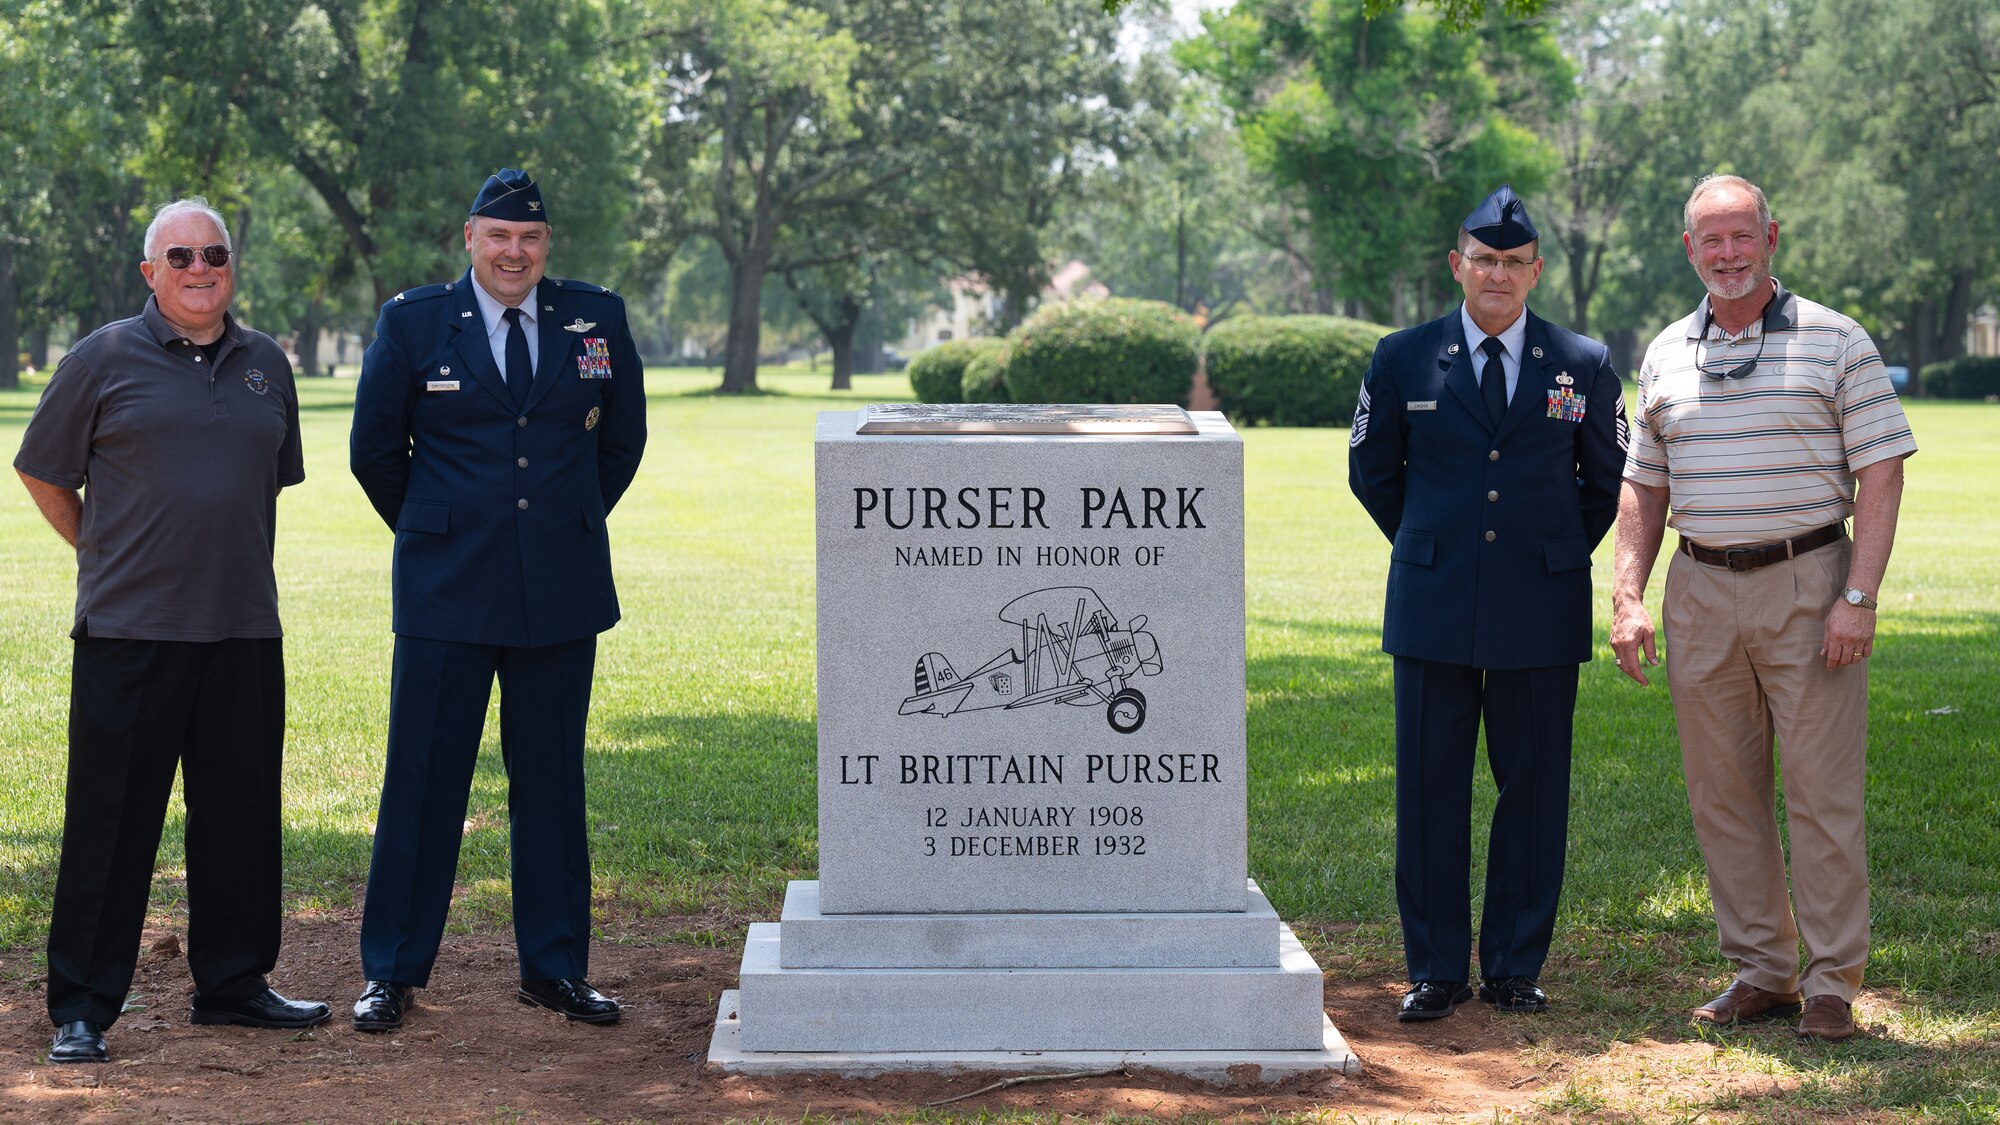 Col. Mark Dmytryszyn, left, 2nd Bomb Wing commander, and Chief Master Sgt. Travis Chadick, right, 2nd Bomb Wing command chief, pose for a photo with descendents of Lt. Brittain Purser during the Purser Park Monument unveiling ceremony at Barksdale Air Force Base, Louisiana, July 30, 2021. Lt. Brittain Purser was a pilot who passed away during a take-off collision at Barksdale and the monument honors his bravery and dedication to the Air Force mission. (U.S. Air Force photo by Airman 1st Class Jonathan E. Ramos)